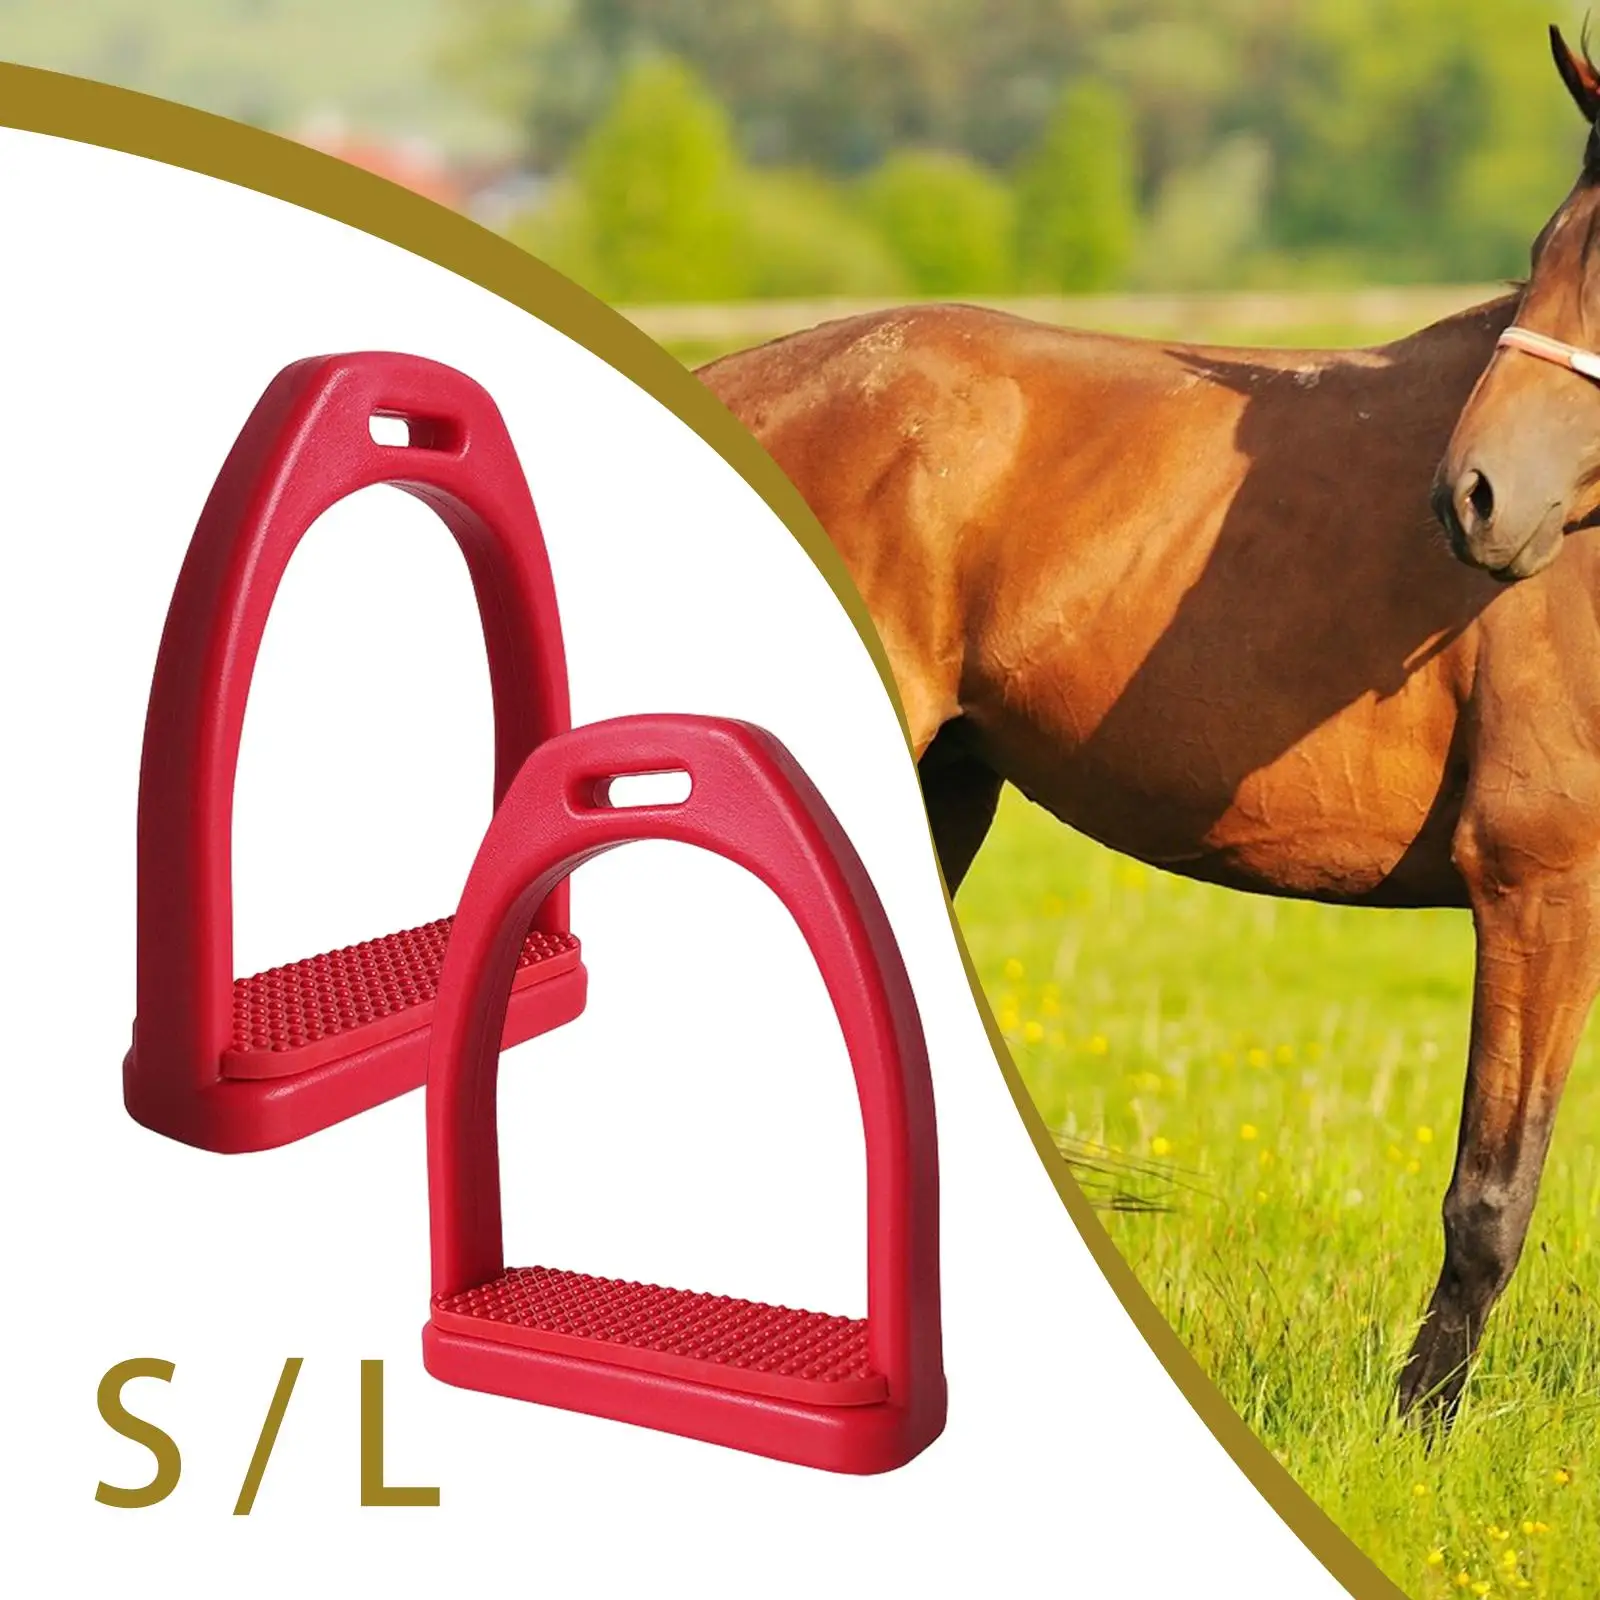 2Pcs Horse Riding Stirrups Equestrian Training Tool Non Slip High Strength for Horse Riding Outdoor Sports Kids Adults